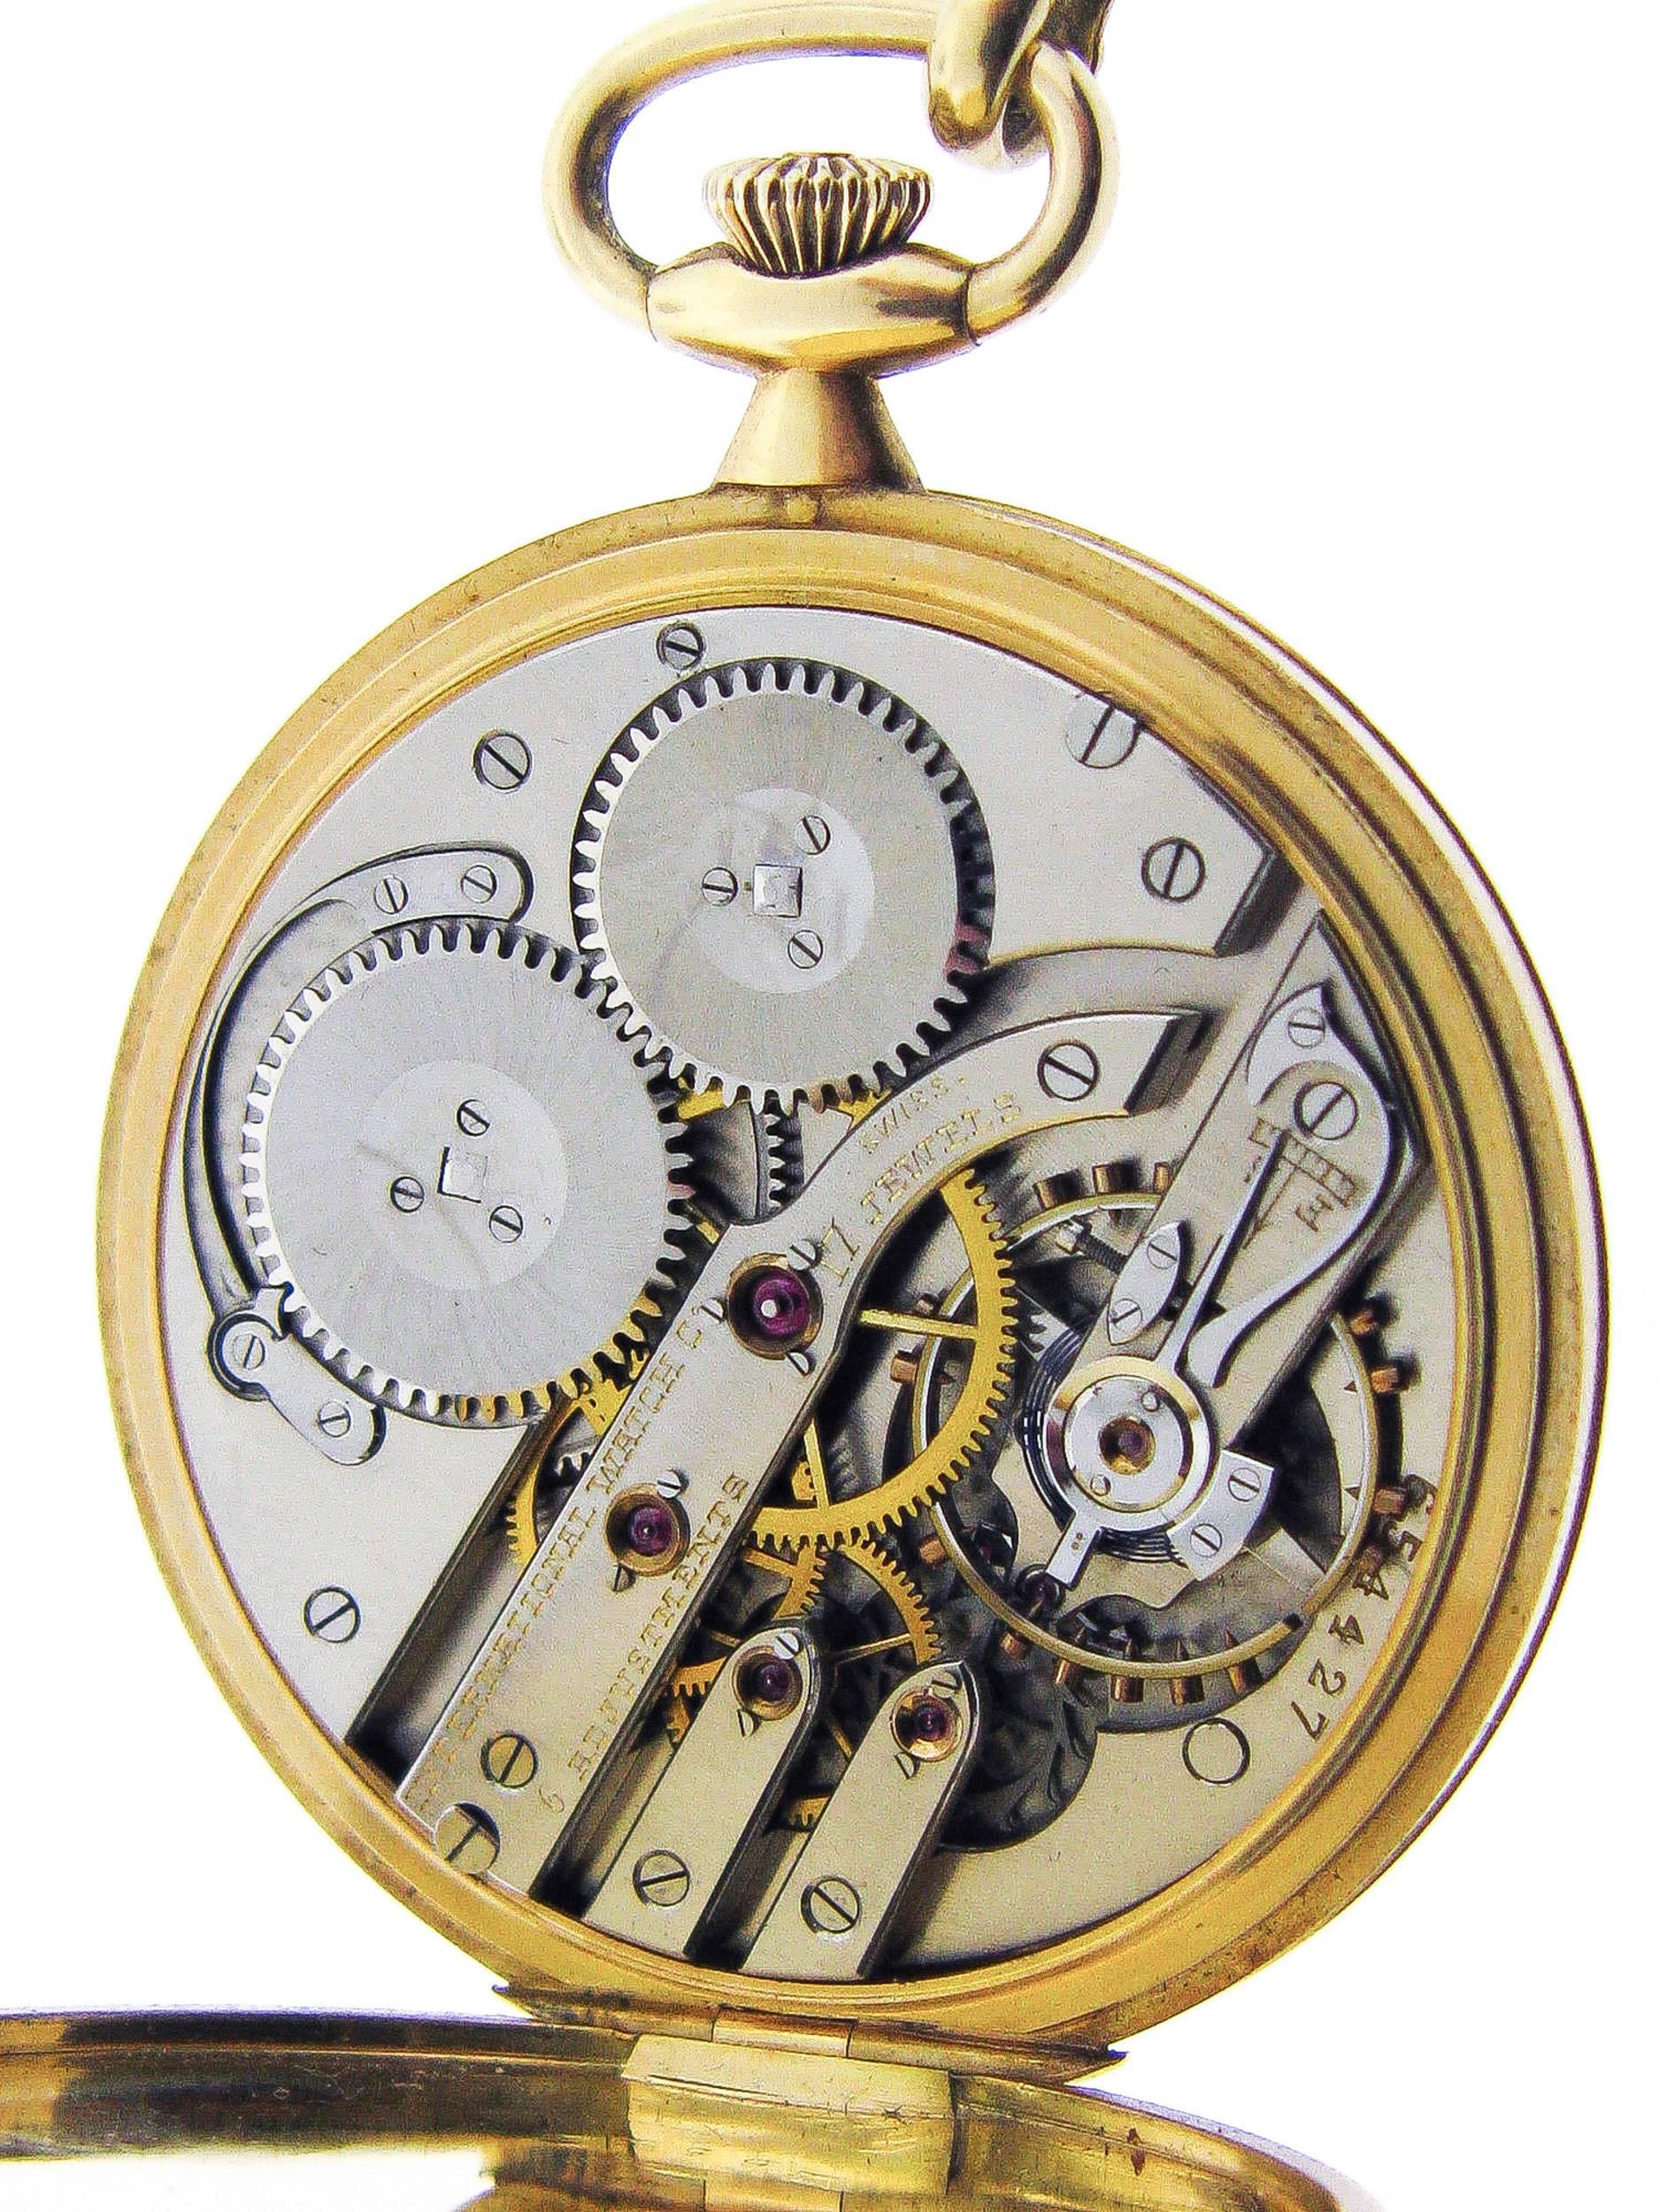 Tiffany & Co. Pocket Watch crafted in 18K yellow gold.  
The movement was produced by International Watch Co. with case number 26520 and movement number 654427 featuring 17 jewels.
Complemented by a long bar links chain.
